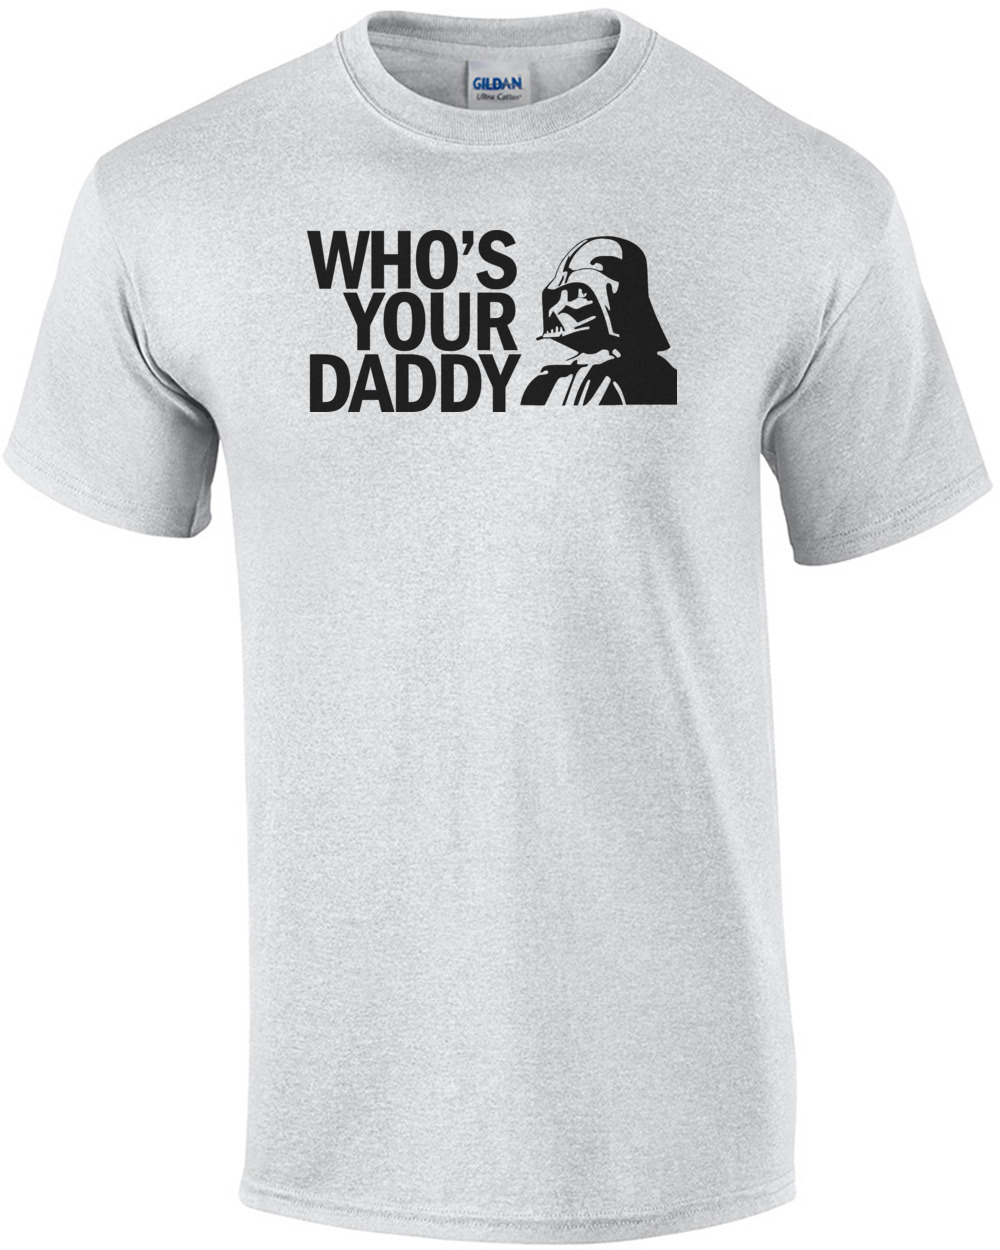 whos your daddy shirt